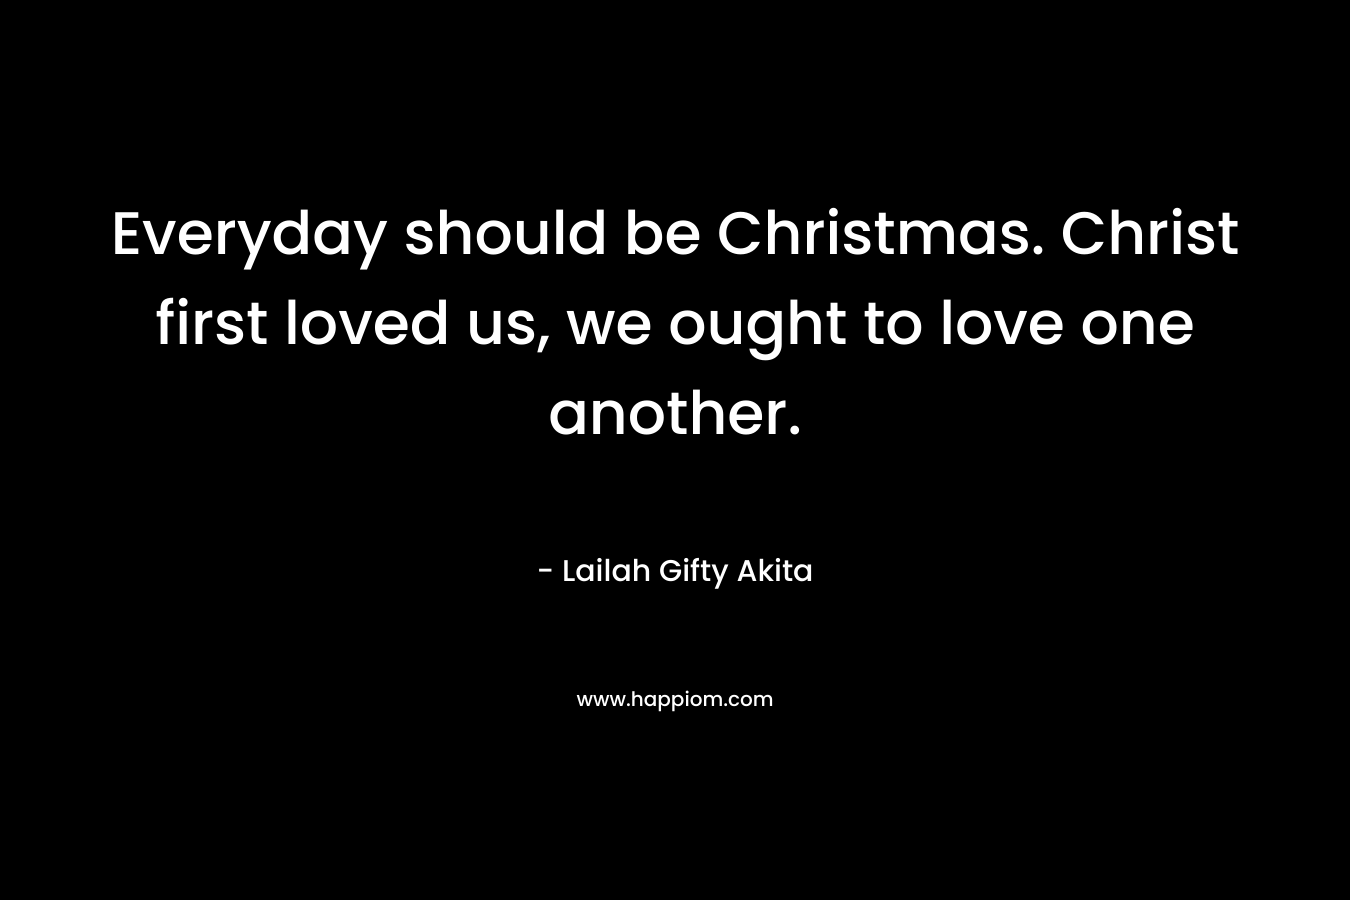 Everyday should be Christmas. Christ first loved us, we ought to love one another.